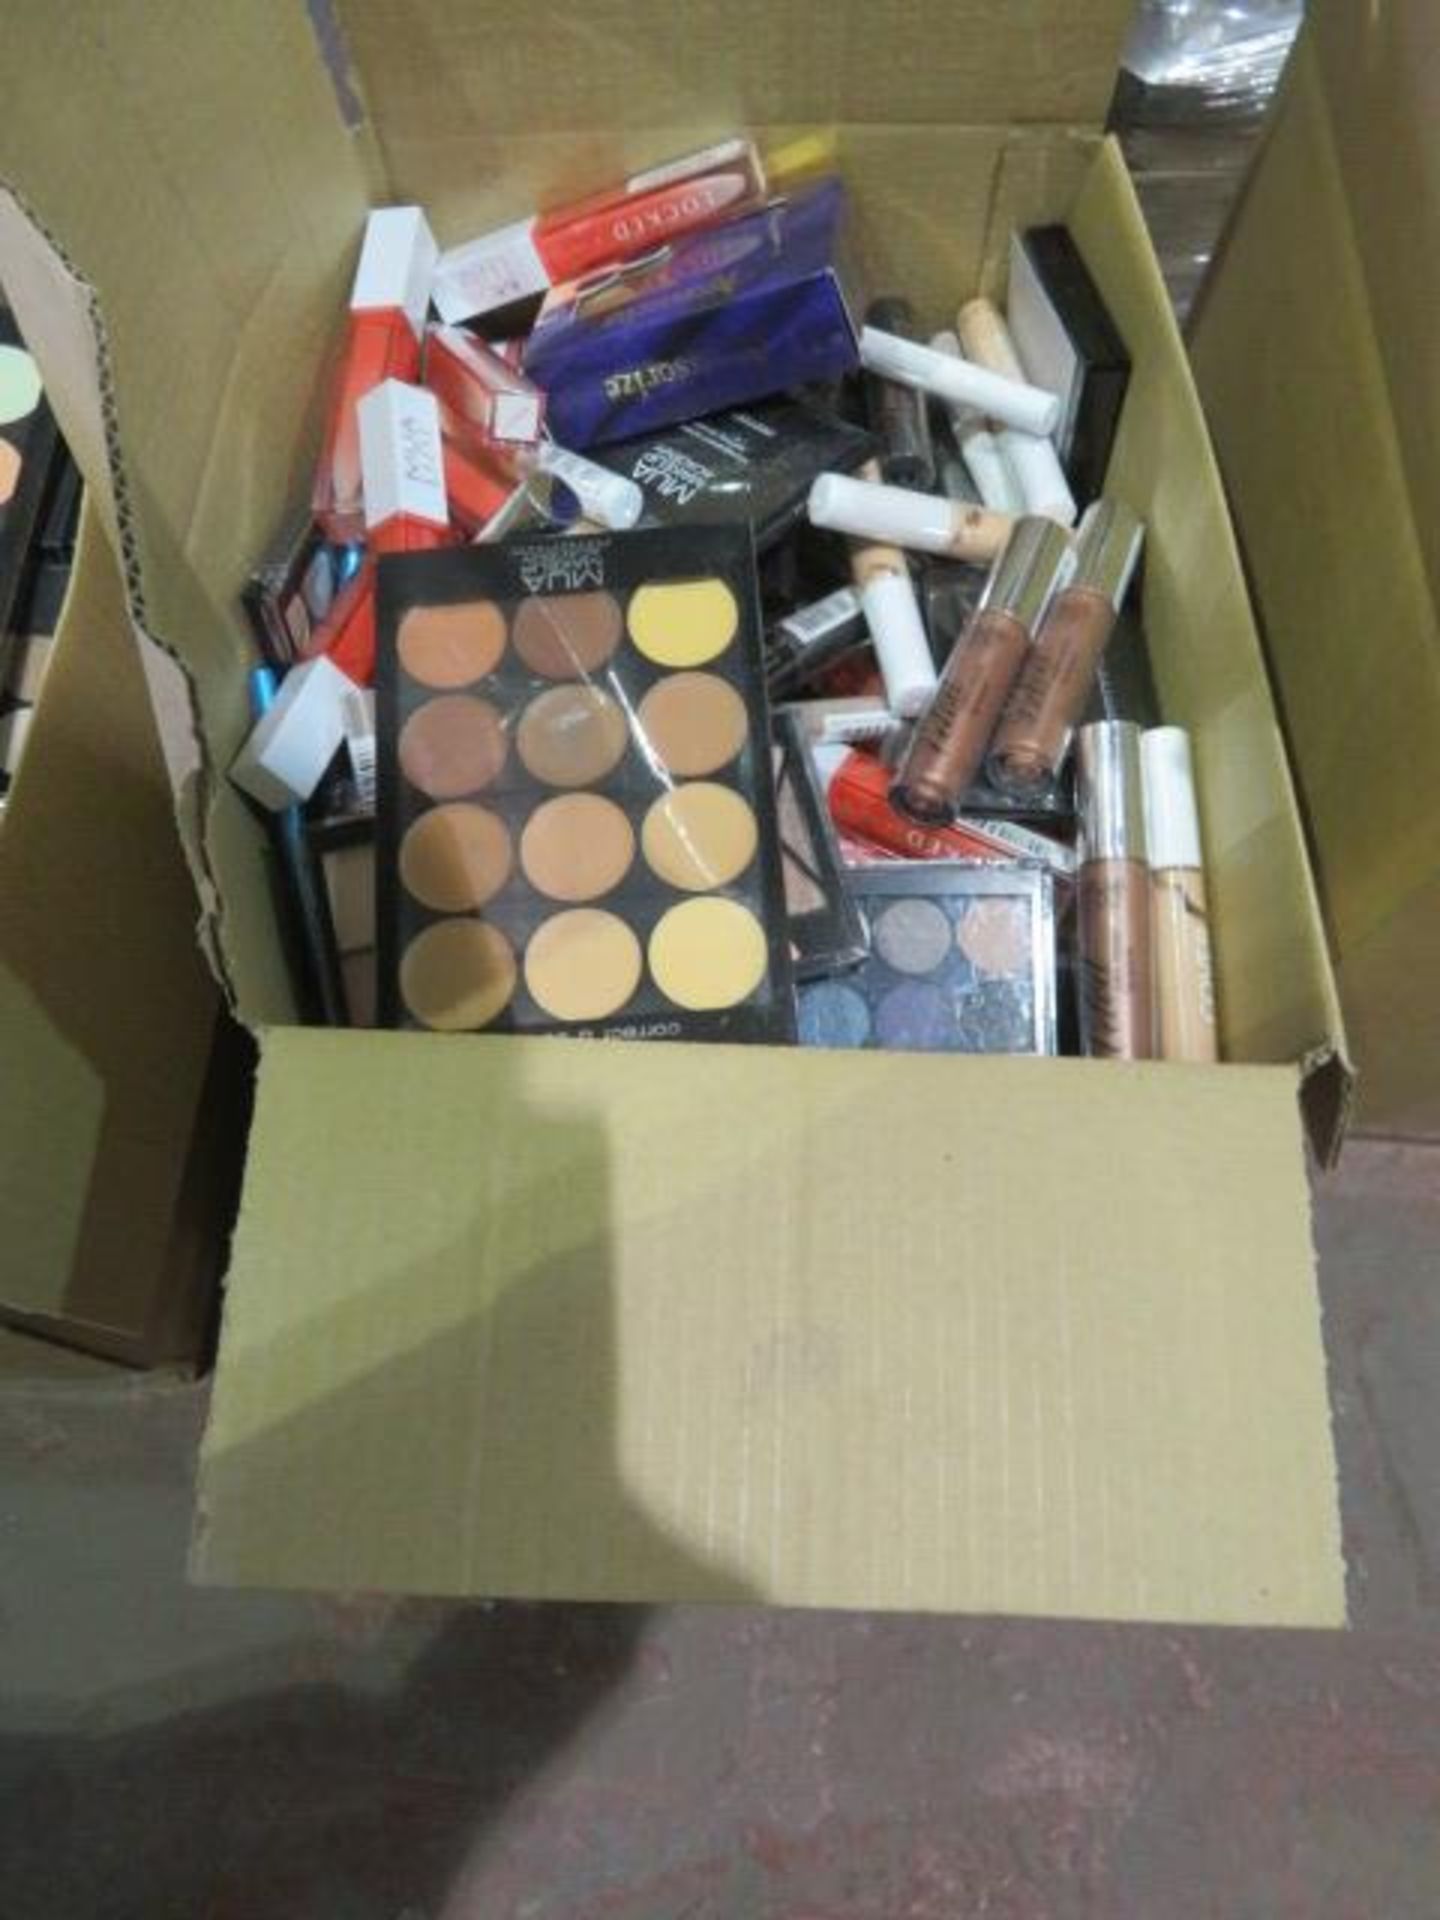 Circa. 200 items of various new make up acadamy make up to include: eye primer, locked lip primer, - Image 2 of 2